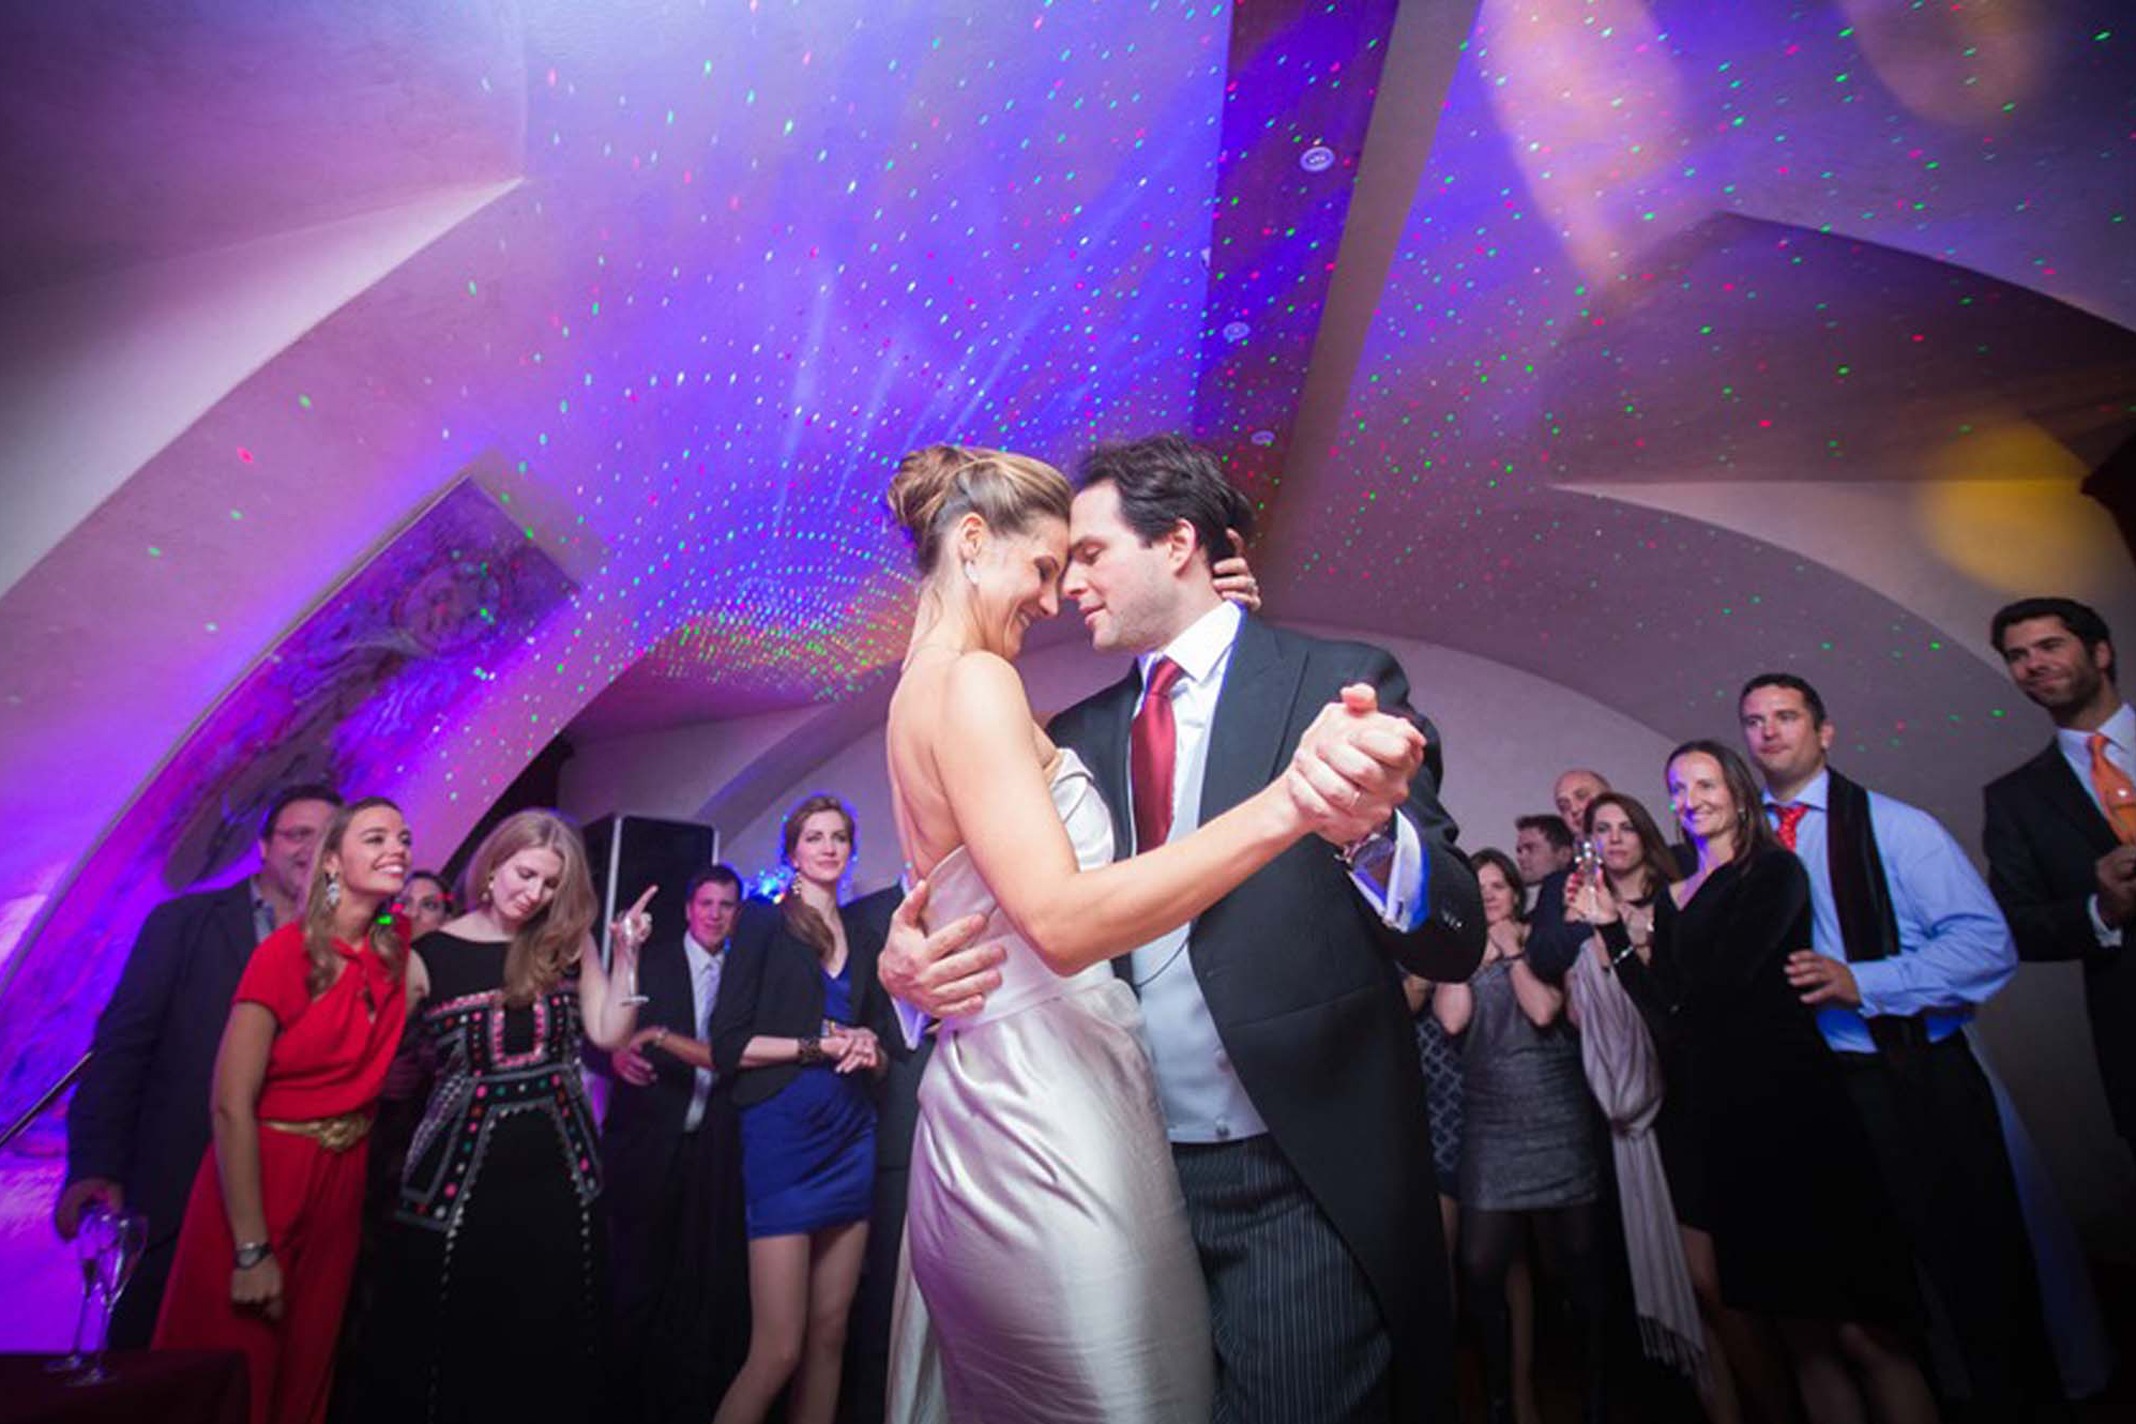 Jess Brichto is founder of Start the Dance, which offers personalised first dance wedding lessons for couples across the UK. startthedance.co.uk